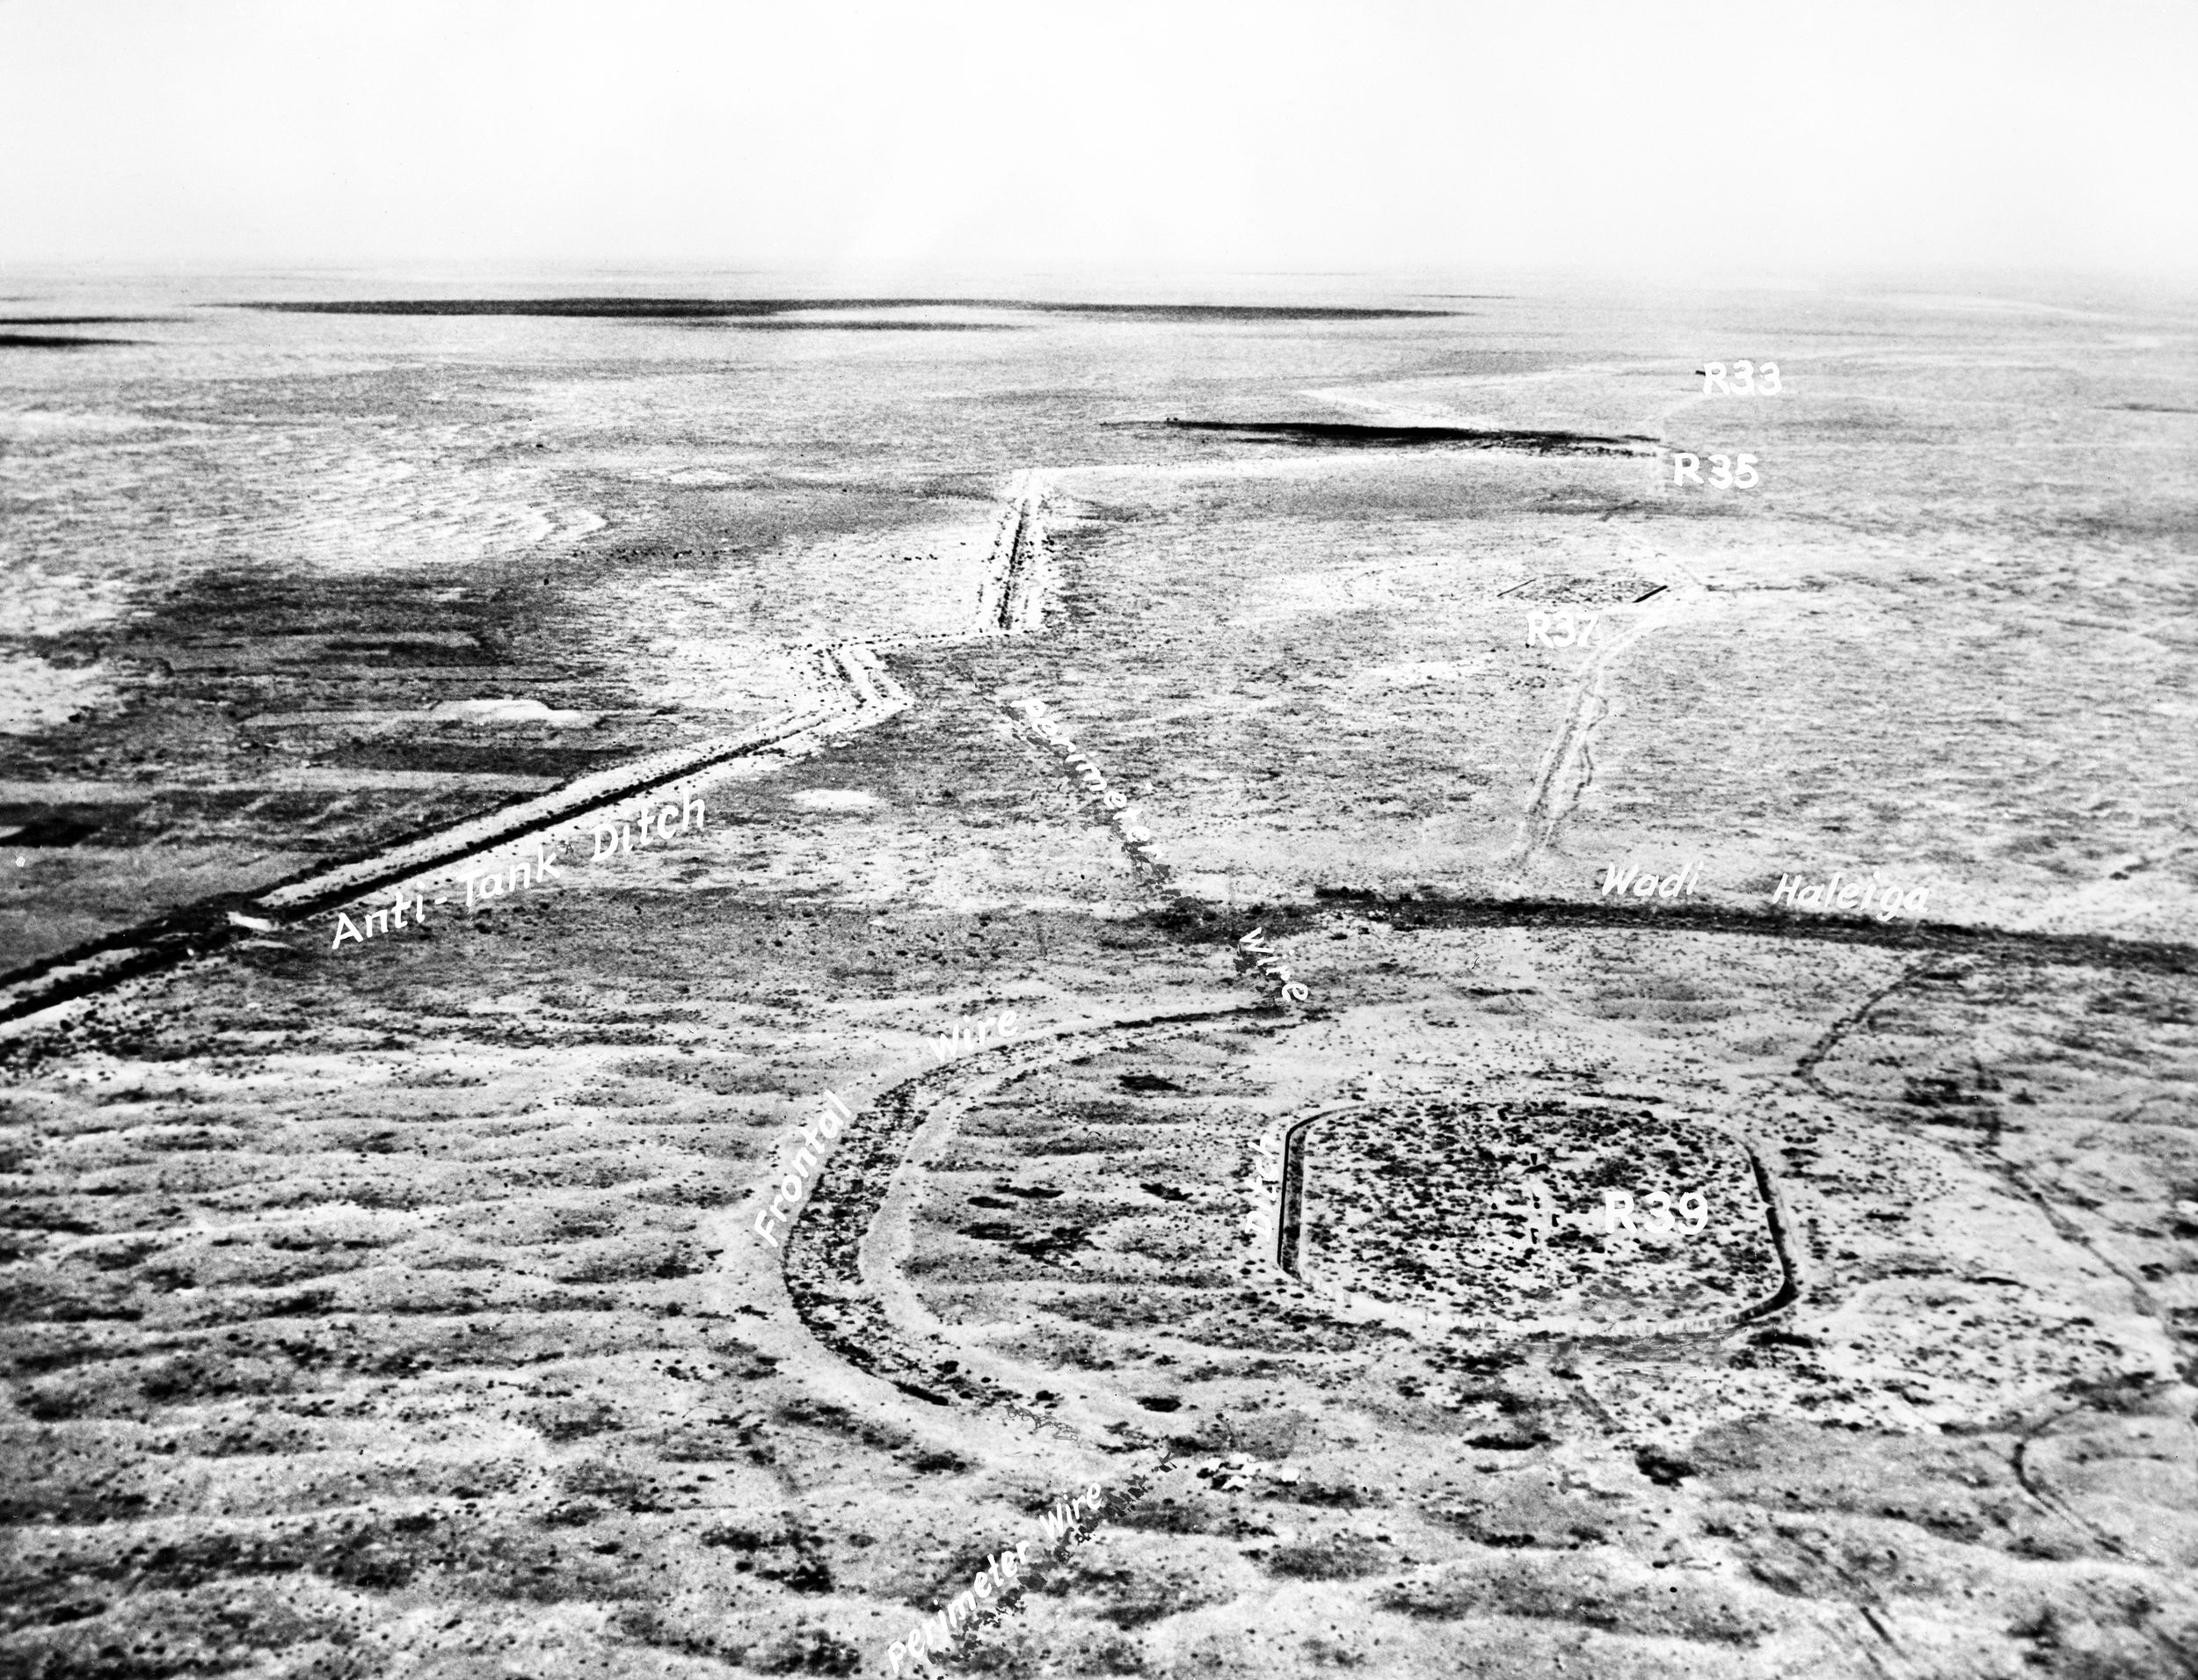 An aerial photo of a key strongpoint in the southern sector of the Tobruk defenses reveals the strength of the network of defenses that enabled the Australians to repulse Rommel’s elite units.